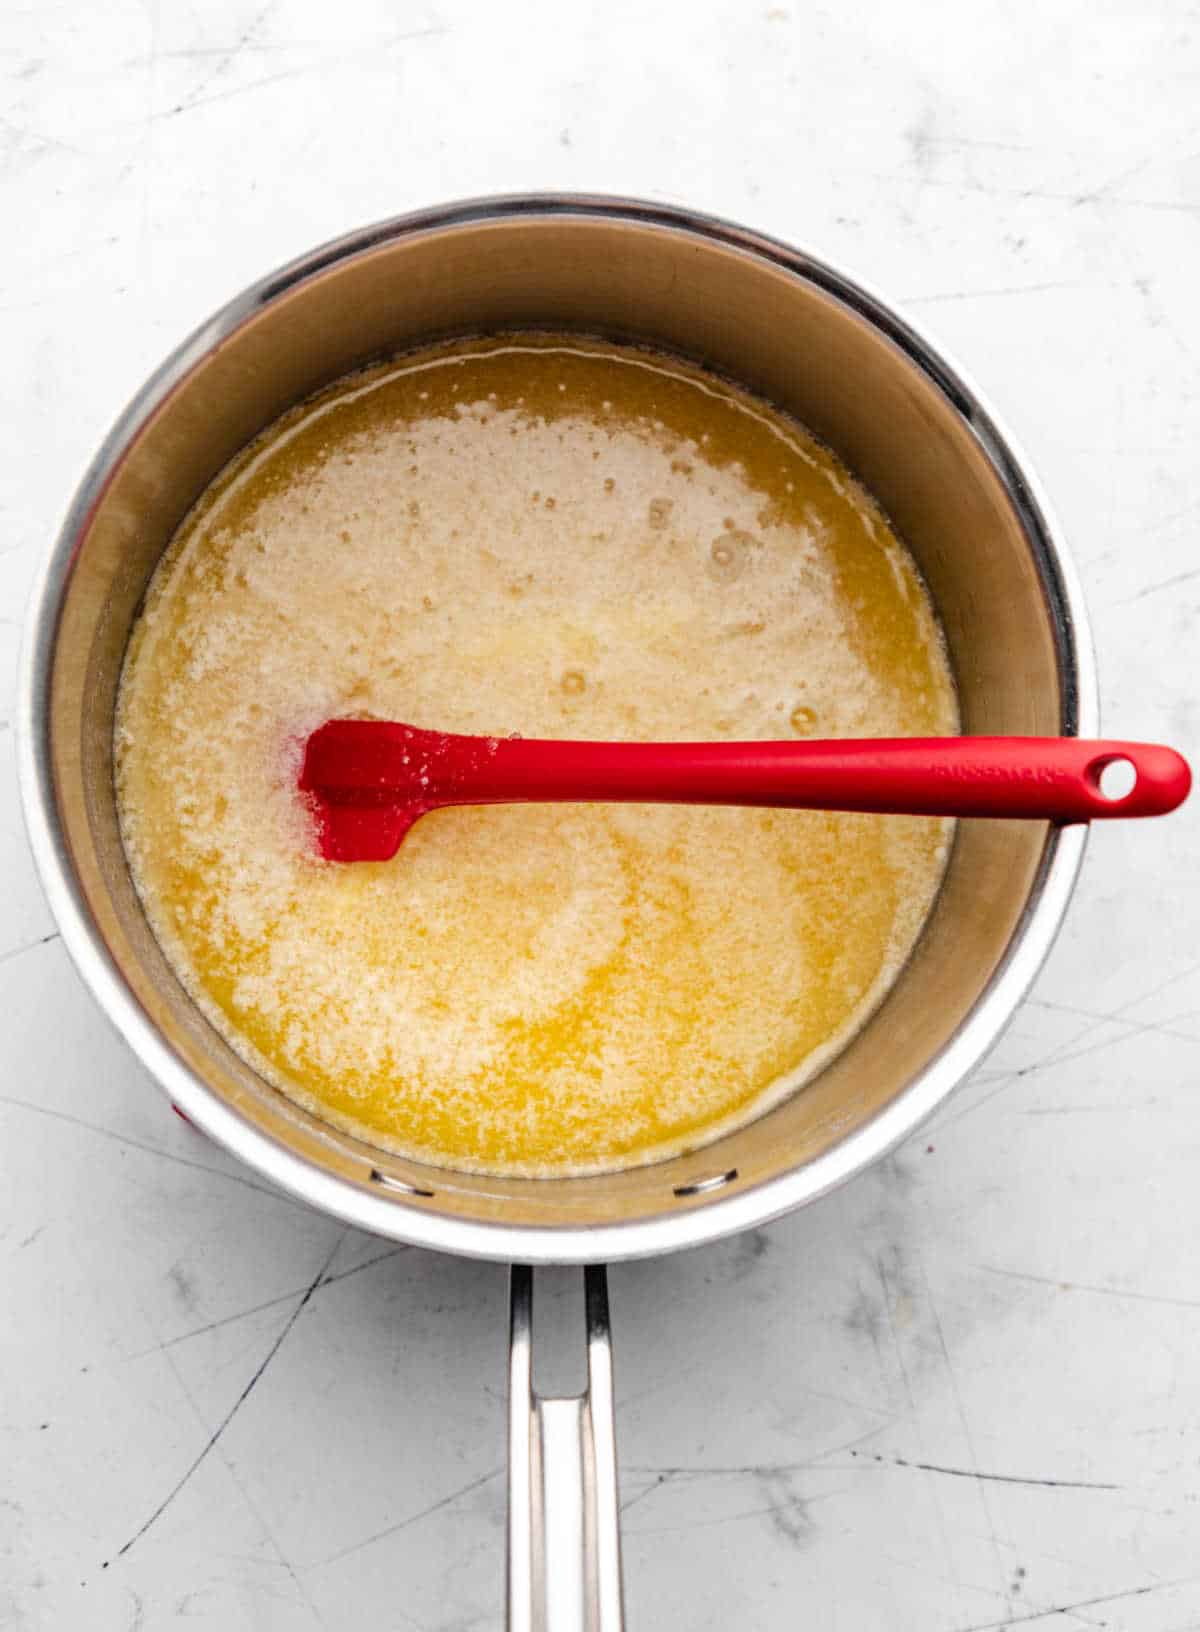 Melted butter and sugar in a saucepan.